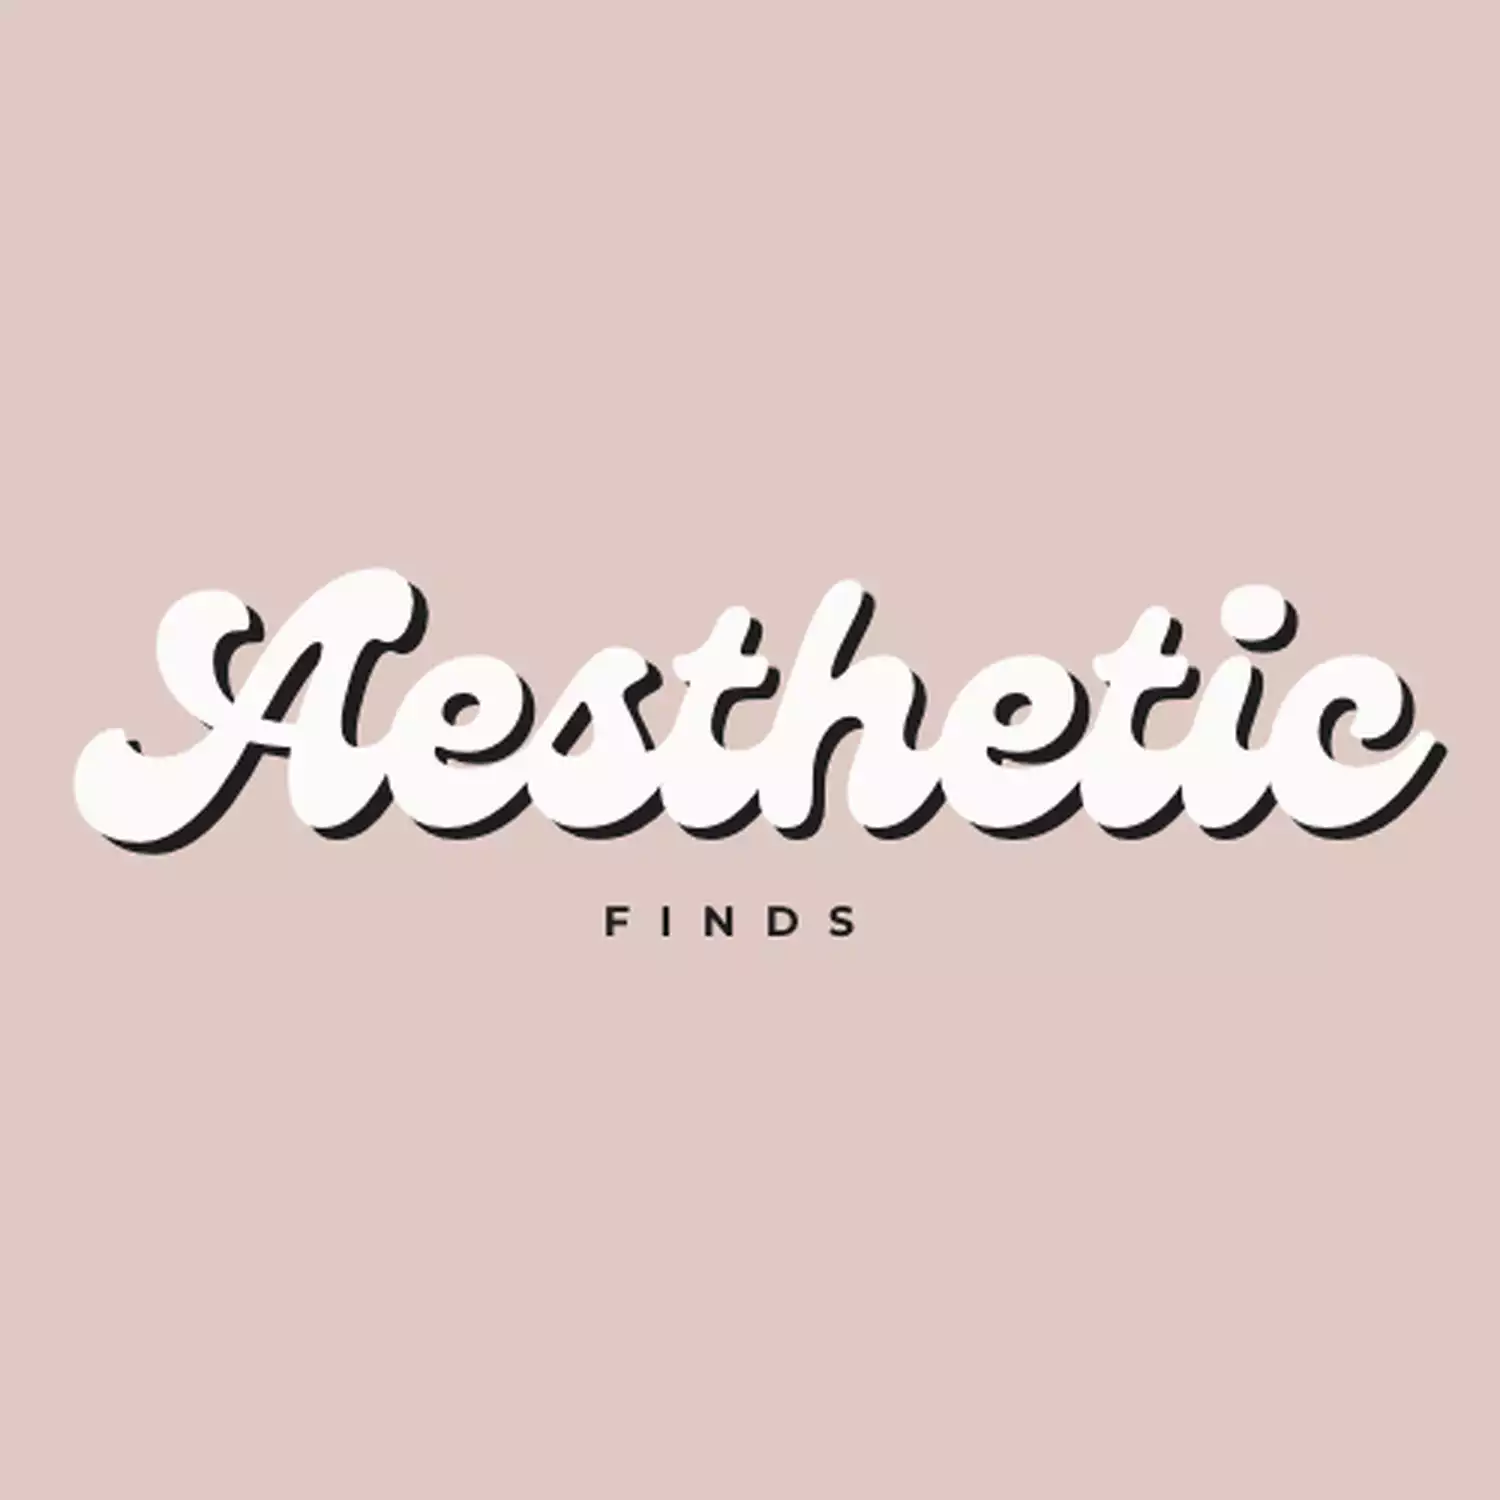 Aesthetic Finds